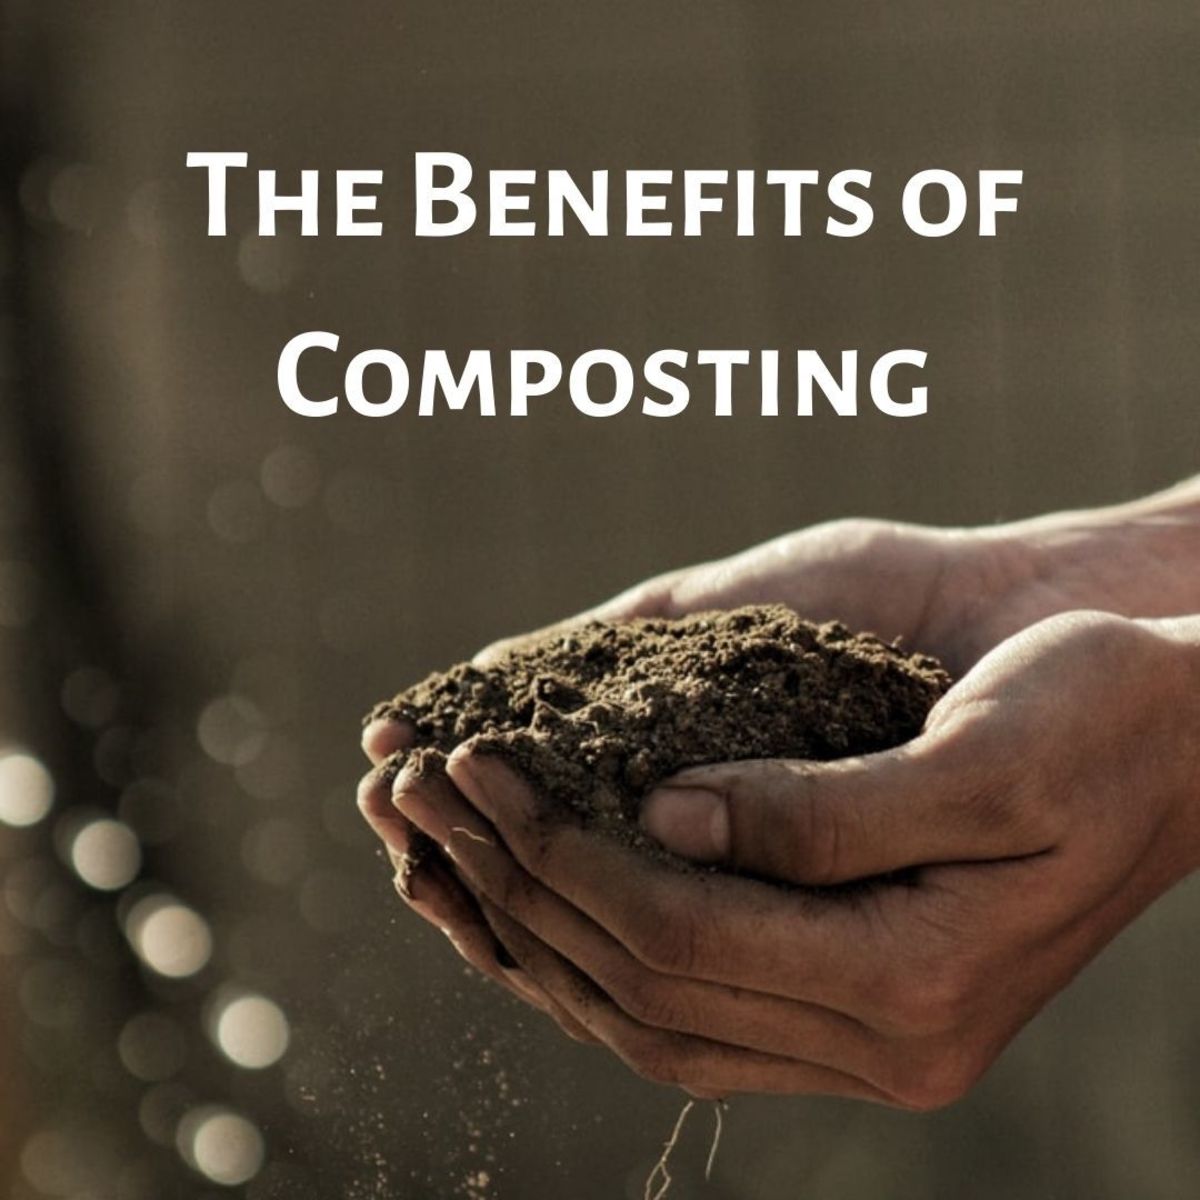 The Benefits of Composting